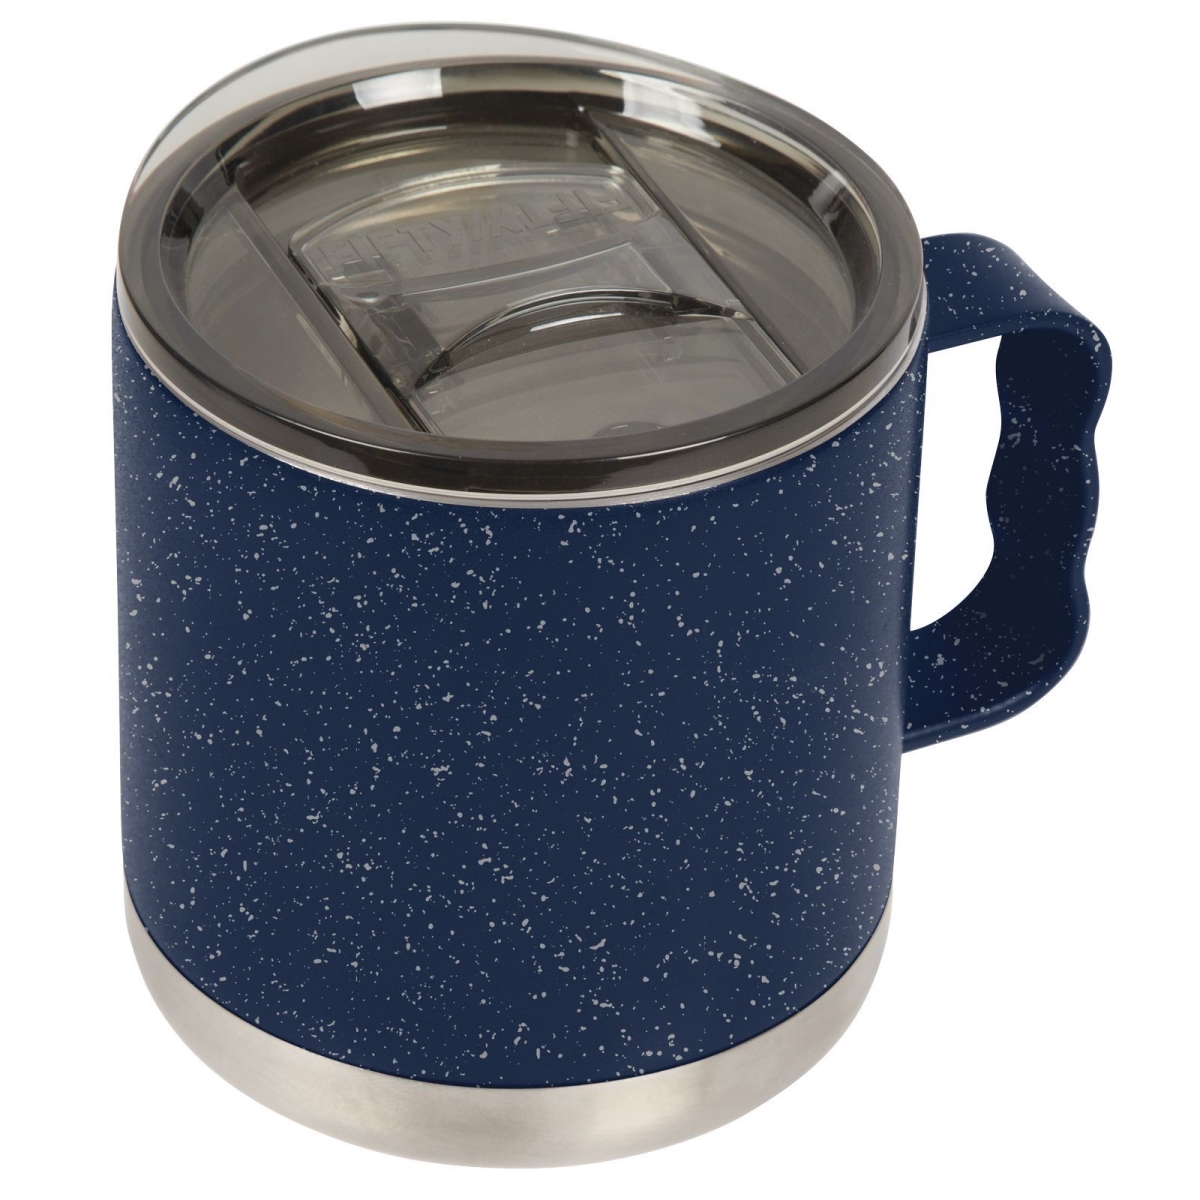 T15000001 15 Oz Double-wall Vacuum Insulated Camp Mugs With Slide Lid, Navy & Speckled